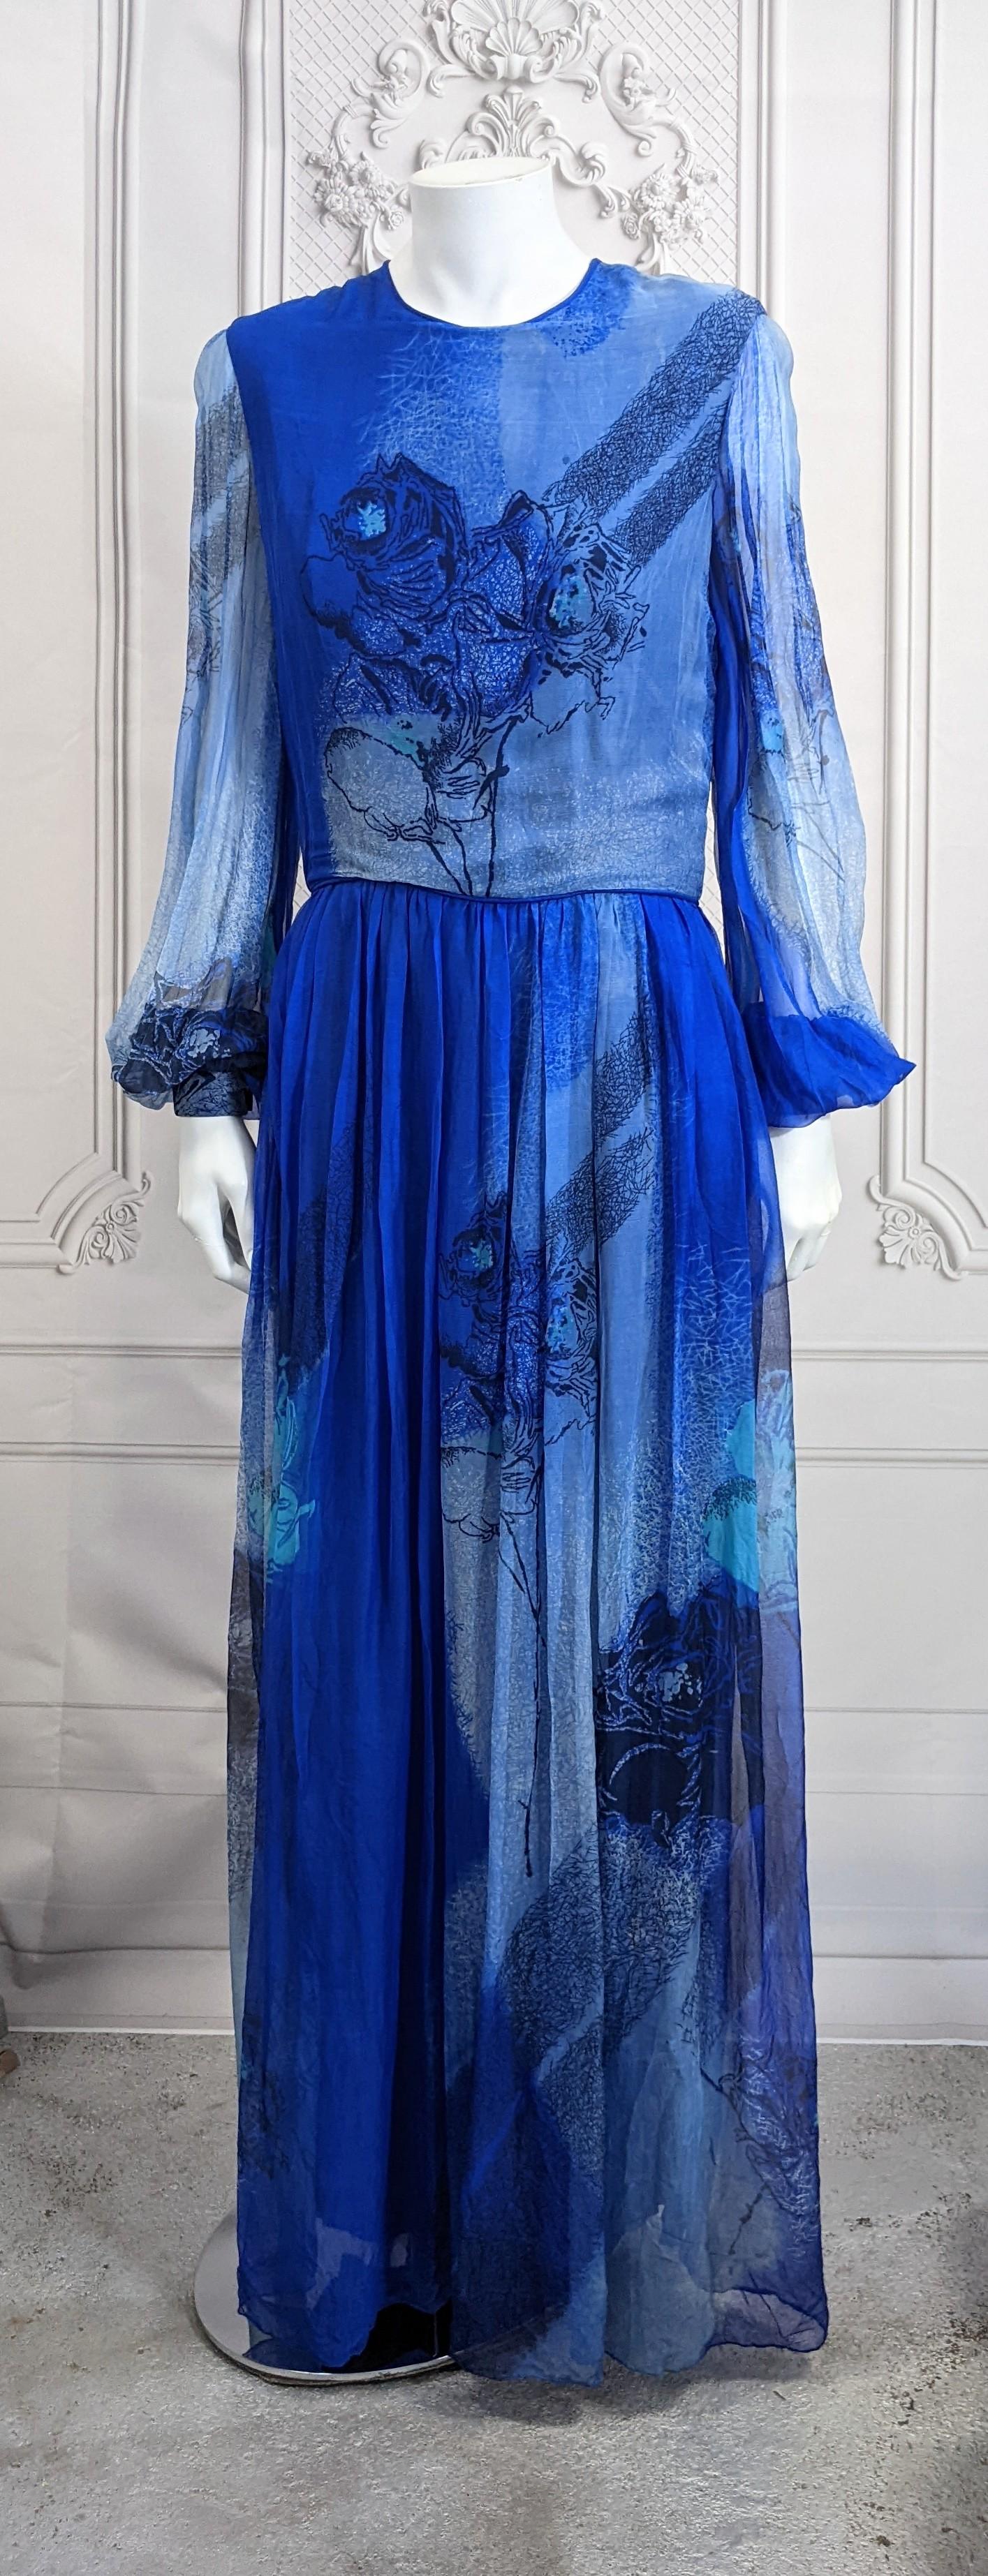 Elegant Ombre Silk Chiffon Rose Print Gown from the 1970's. Simple fitted top with full sheer sleeves and full skirt. Black overprint rose florals are perfectly placed onto the front and back of bodice. Radiating tonal blues are used with a black